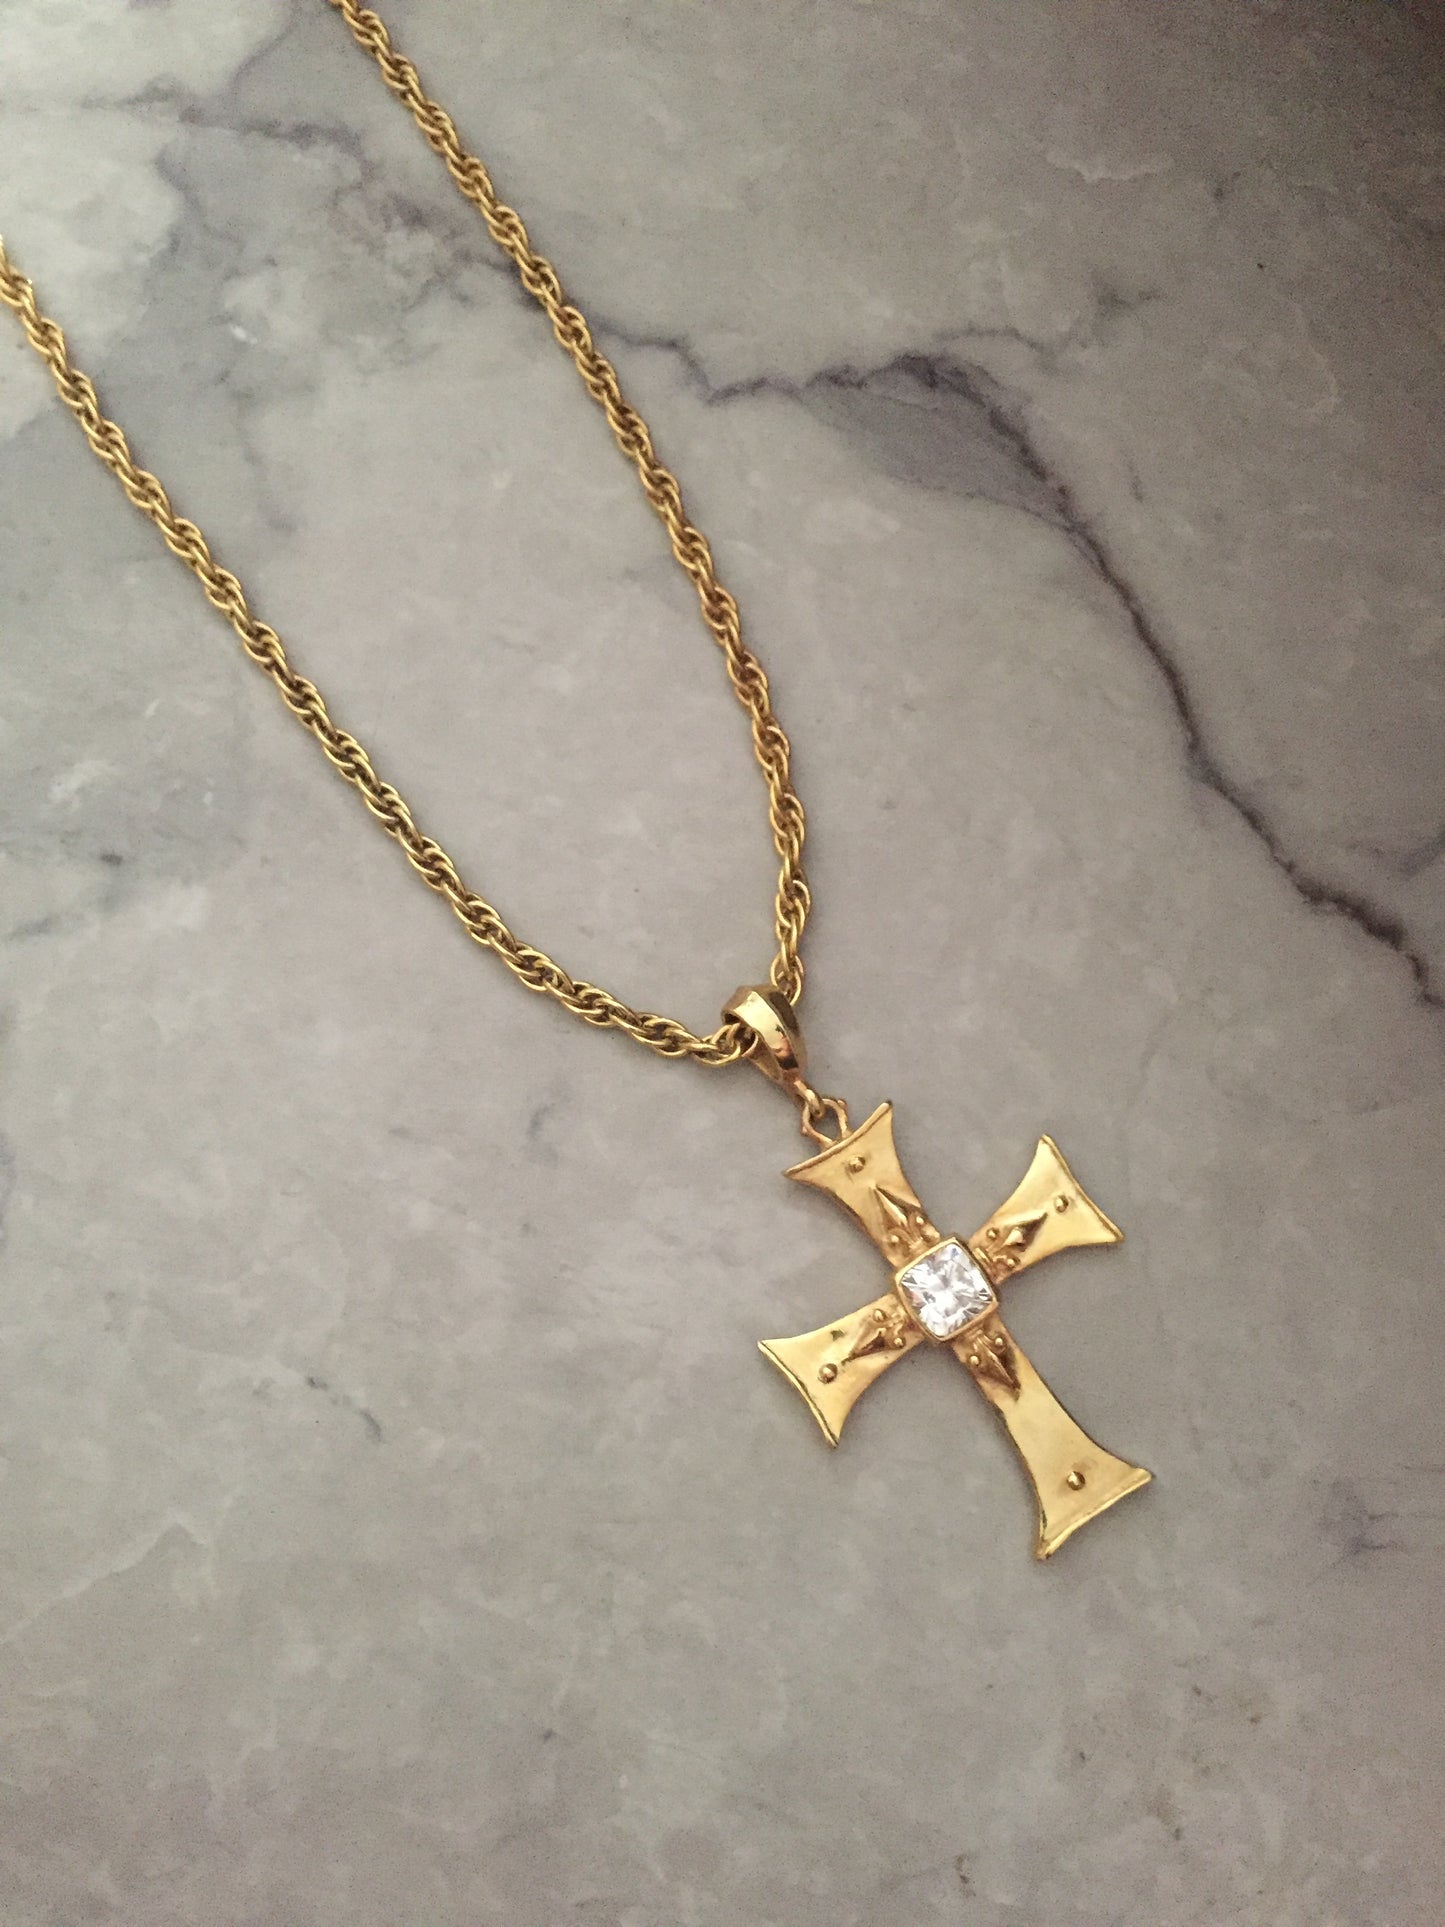 Necklace - Golden Cross with CZ in Sterling Silver by roman paul